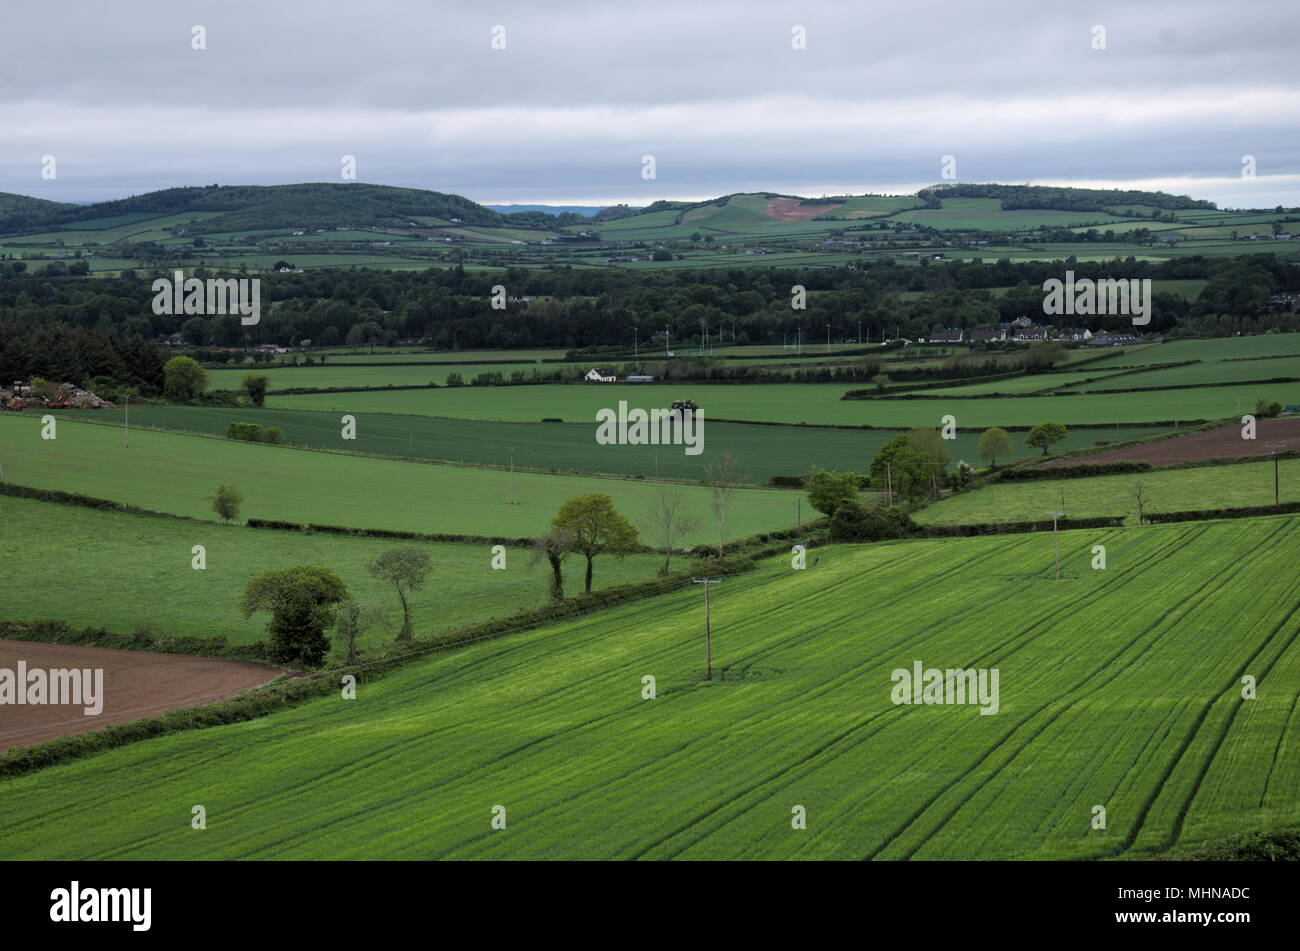 Agriculture fields in Ireland Stock Photo